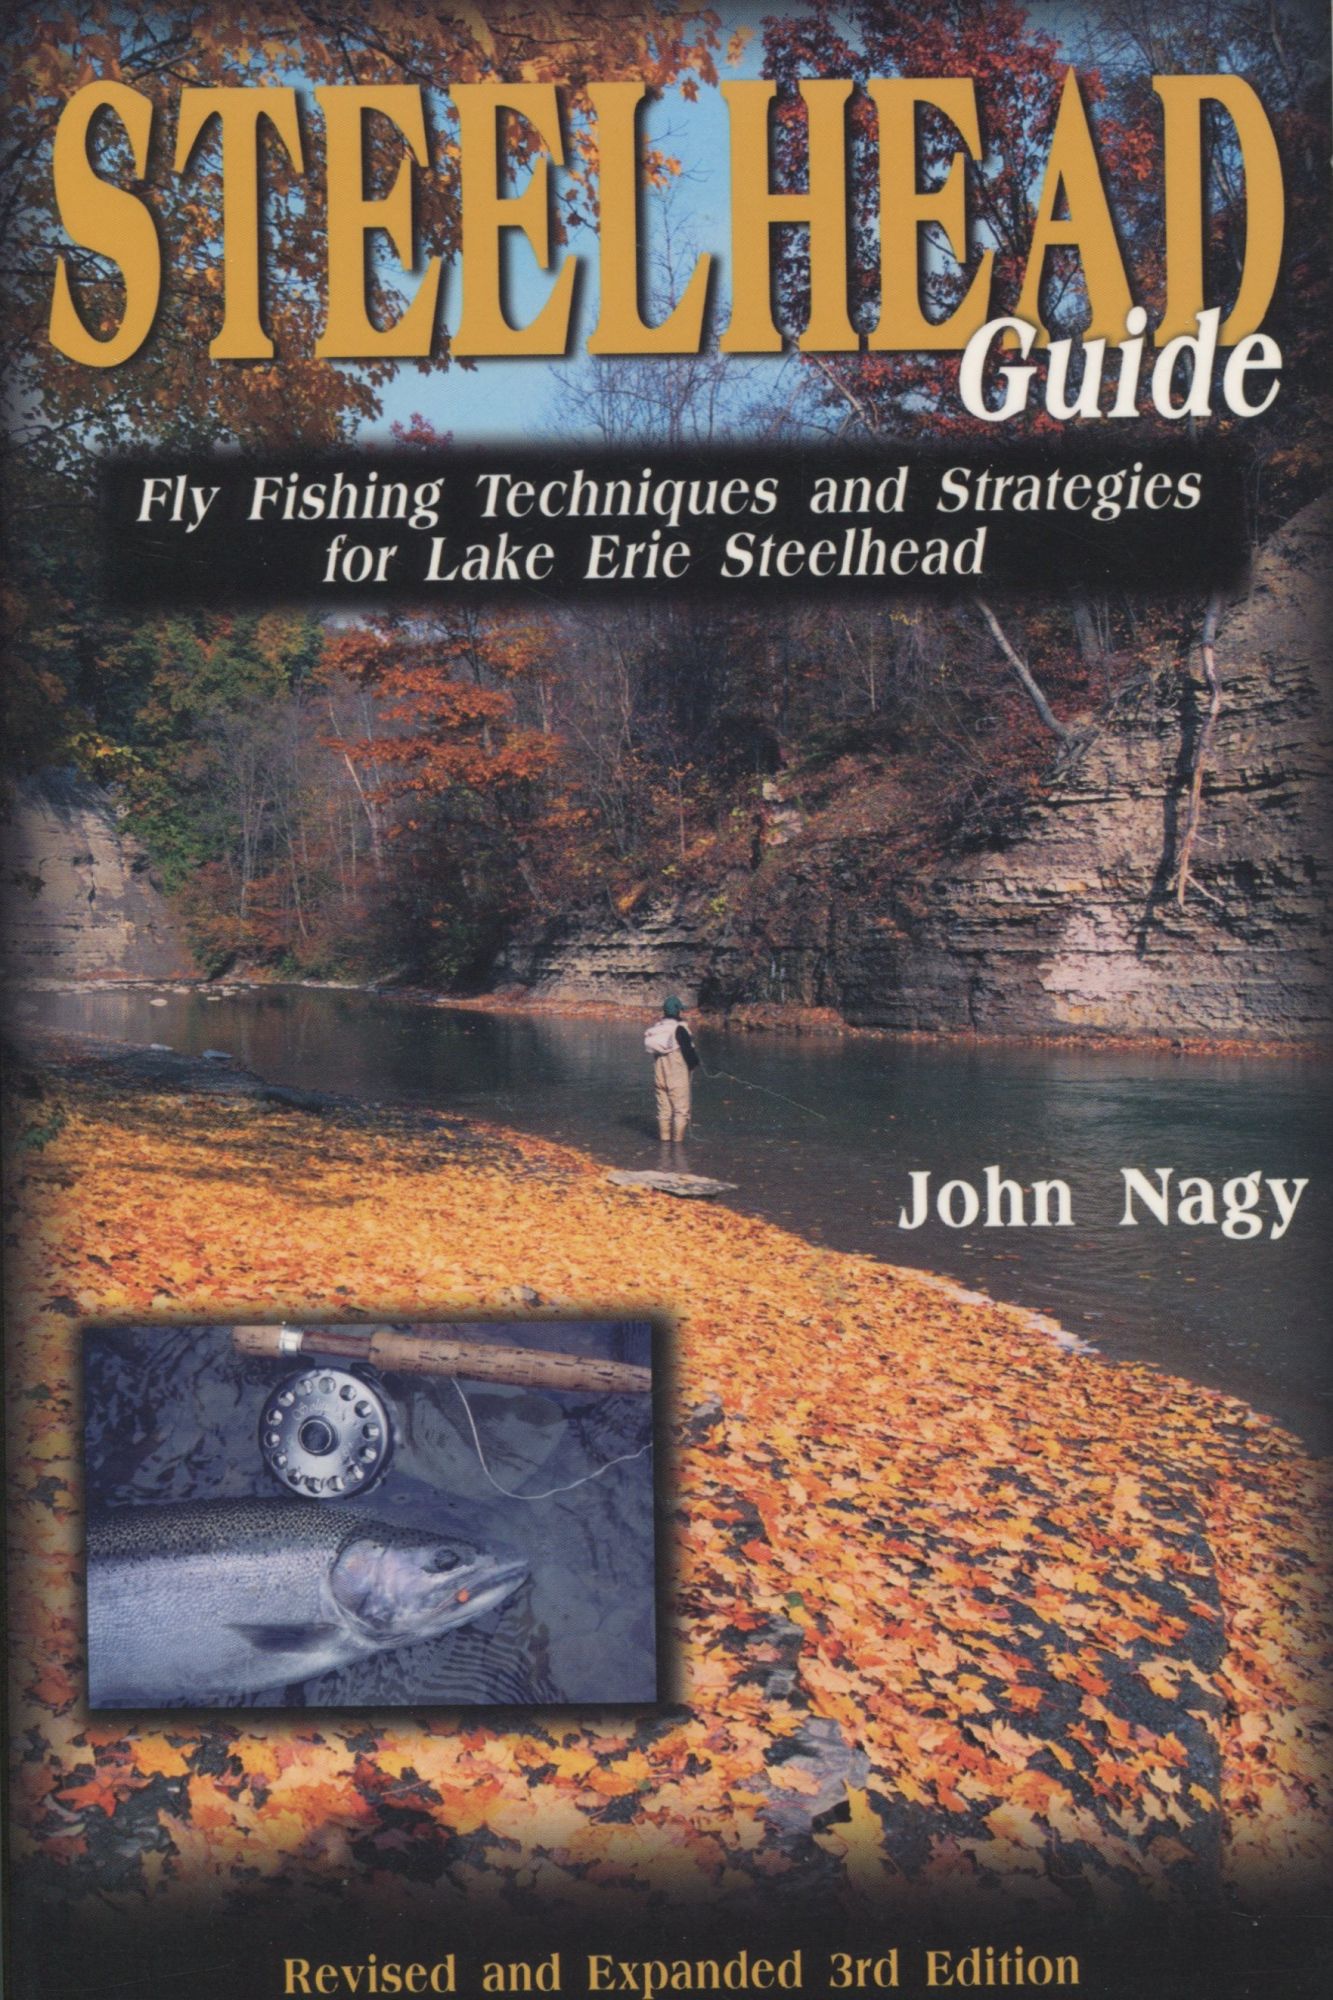 Steelhead Guide: Revised and Expanded Third Edition; fly fishing